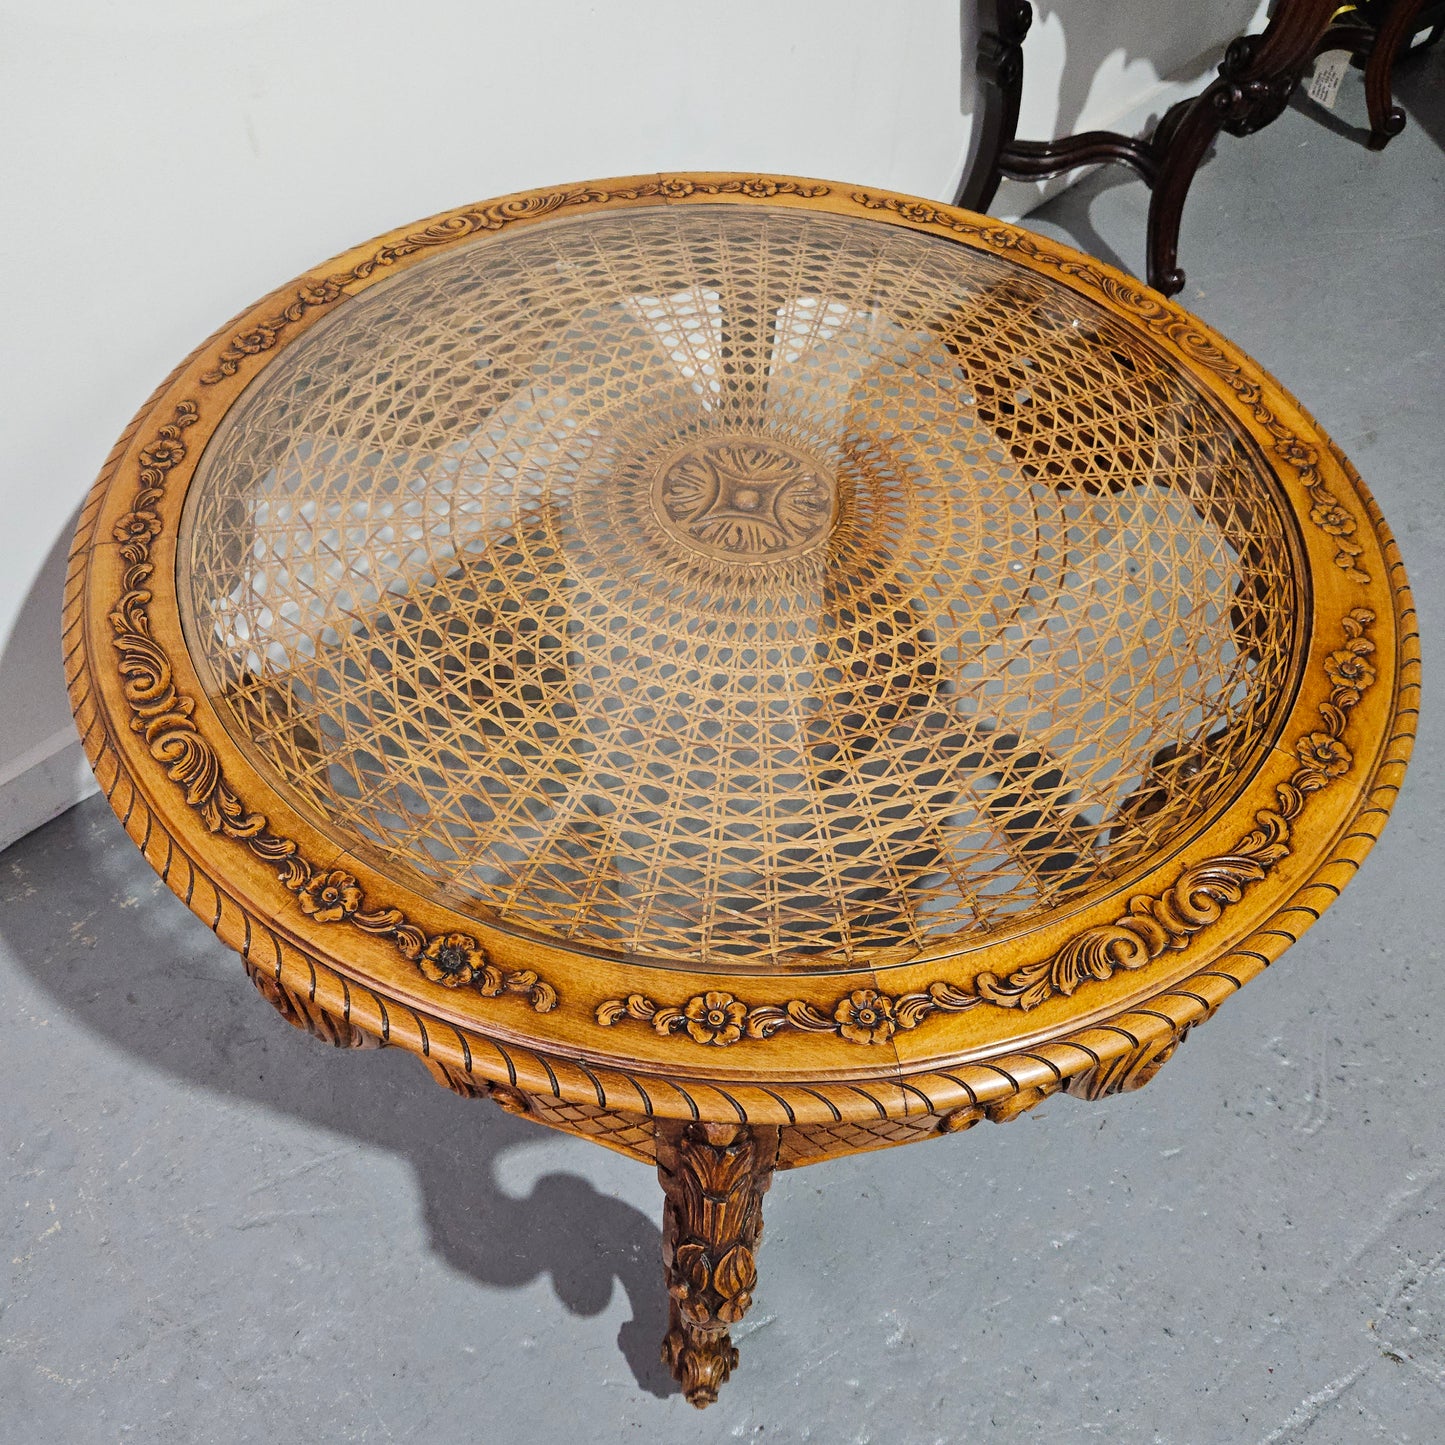 French oak Louis XV style round cane insert coffee table with highly decorative legs and table top. It has a glass cover to fit over the cane. It is in good original condition and has been sourced from France.